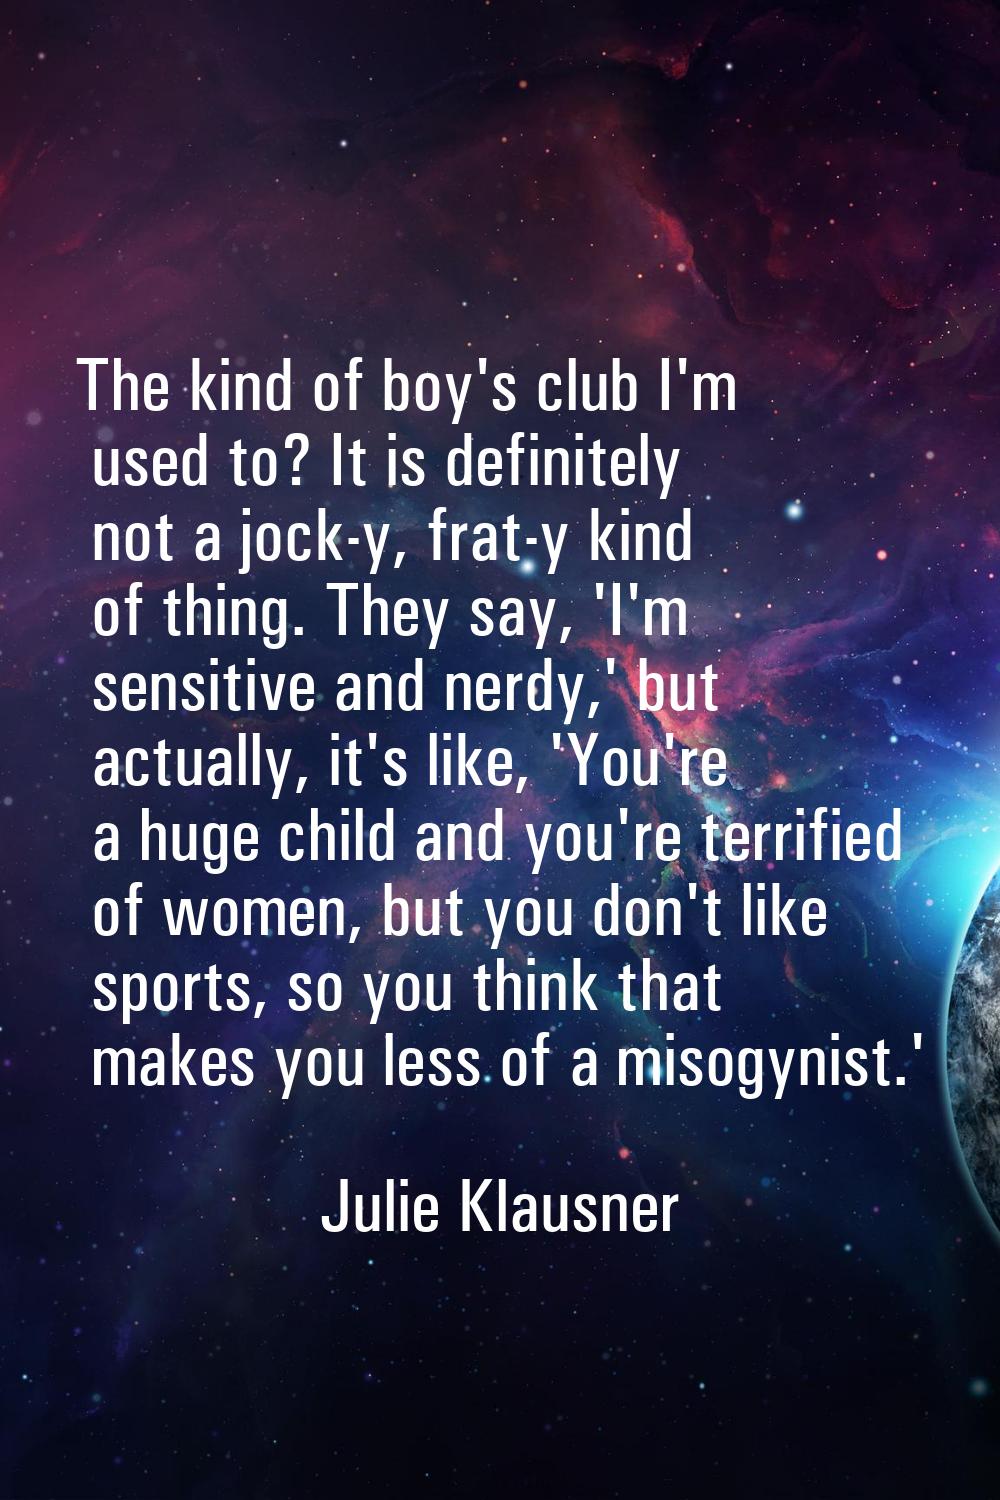 The kind of boy's club I'm used to? It is definitely not a jock-y, frat-y kind of thing. They say, 